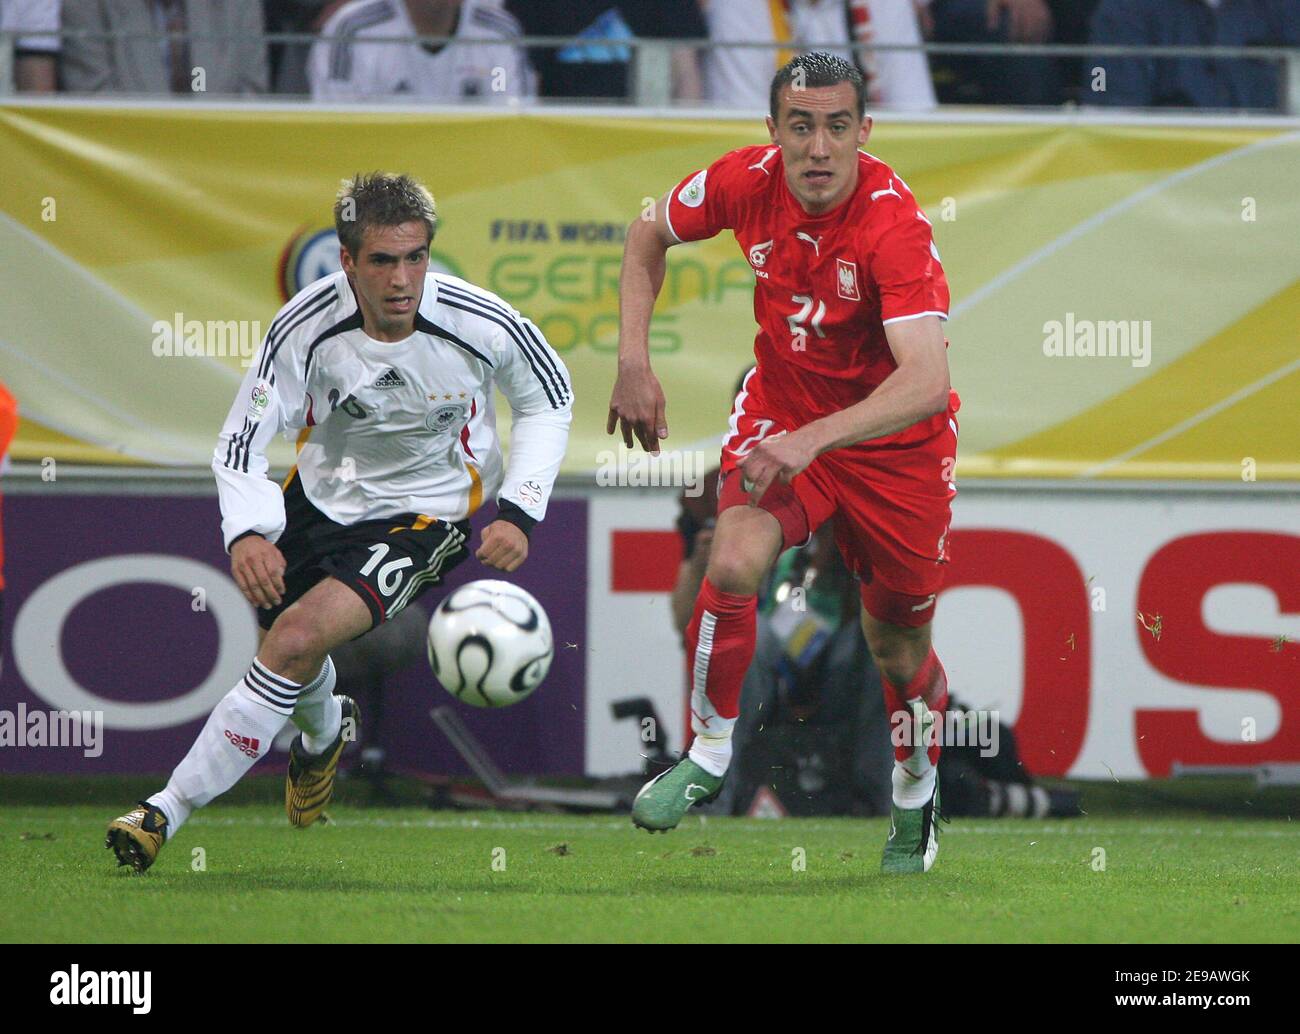 Germany's Philipp Lahm and Ireneusz Jelen during the World Cup 2006, Germany vs Poland at the Signal Iduna Park stadium in Dortmund, Germany on 14, 2006. Germany won 1-0. Photo by Gouhier-Hahn-Orban/Cameleon/ABACAPRESS.COM Stock Photo